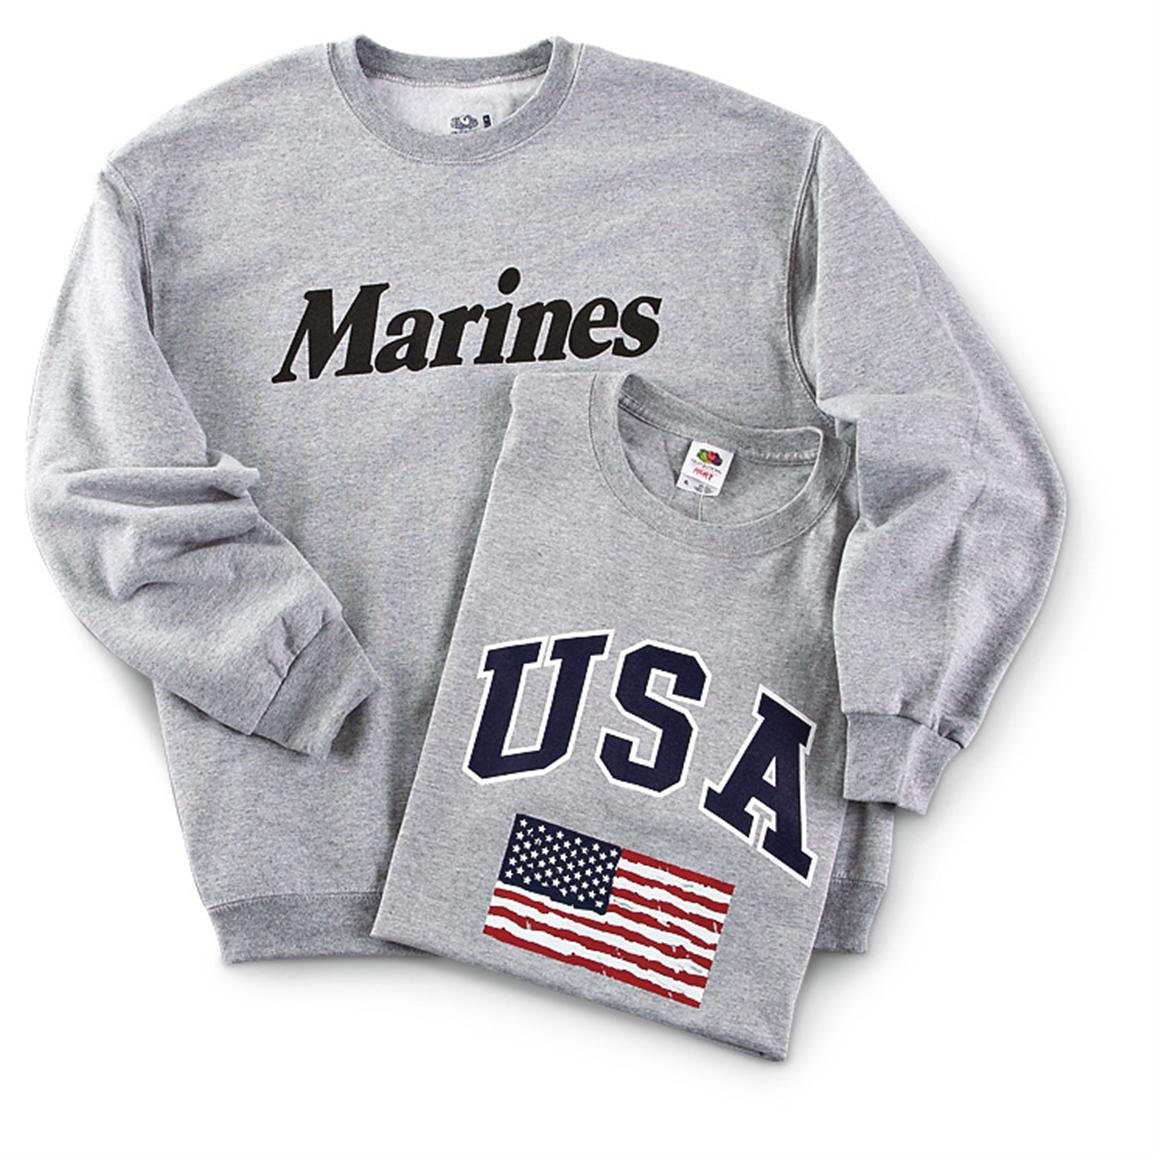 Download 2 - Pc. Patriotic Military Branch Sweatshirt and T - shirt ...